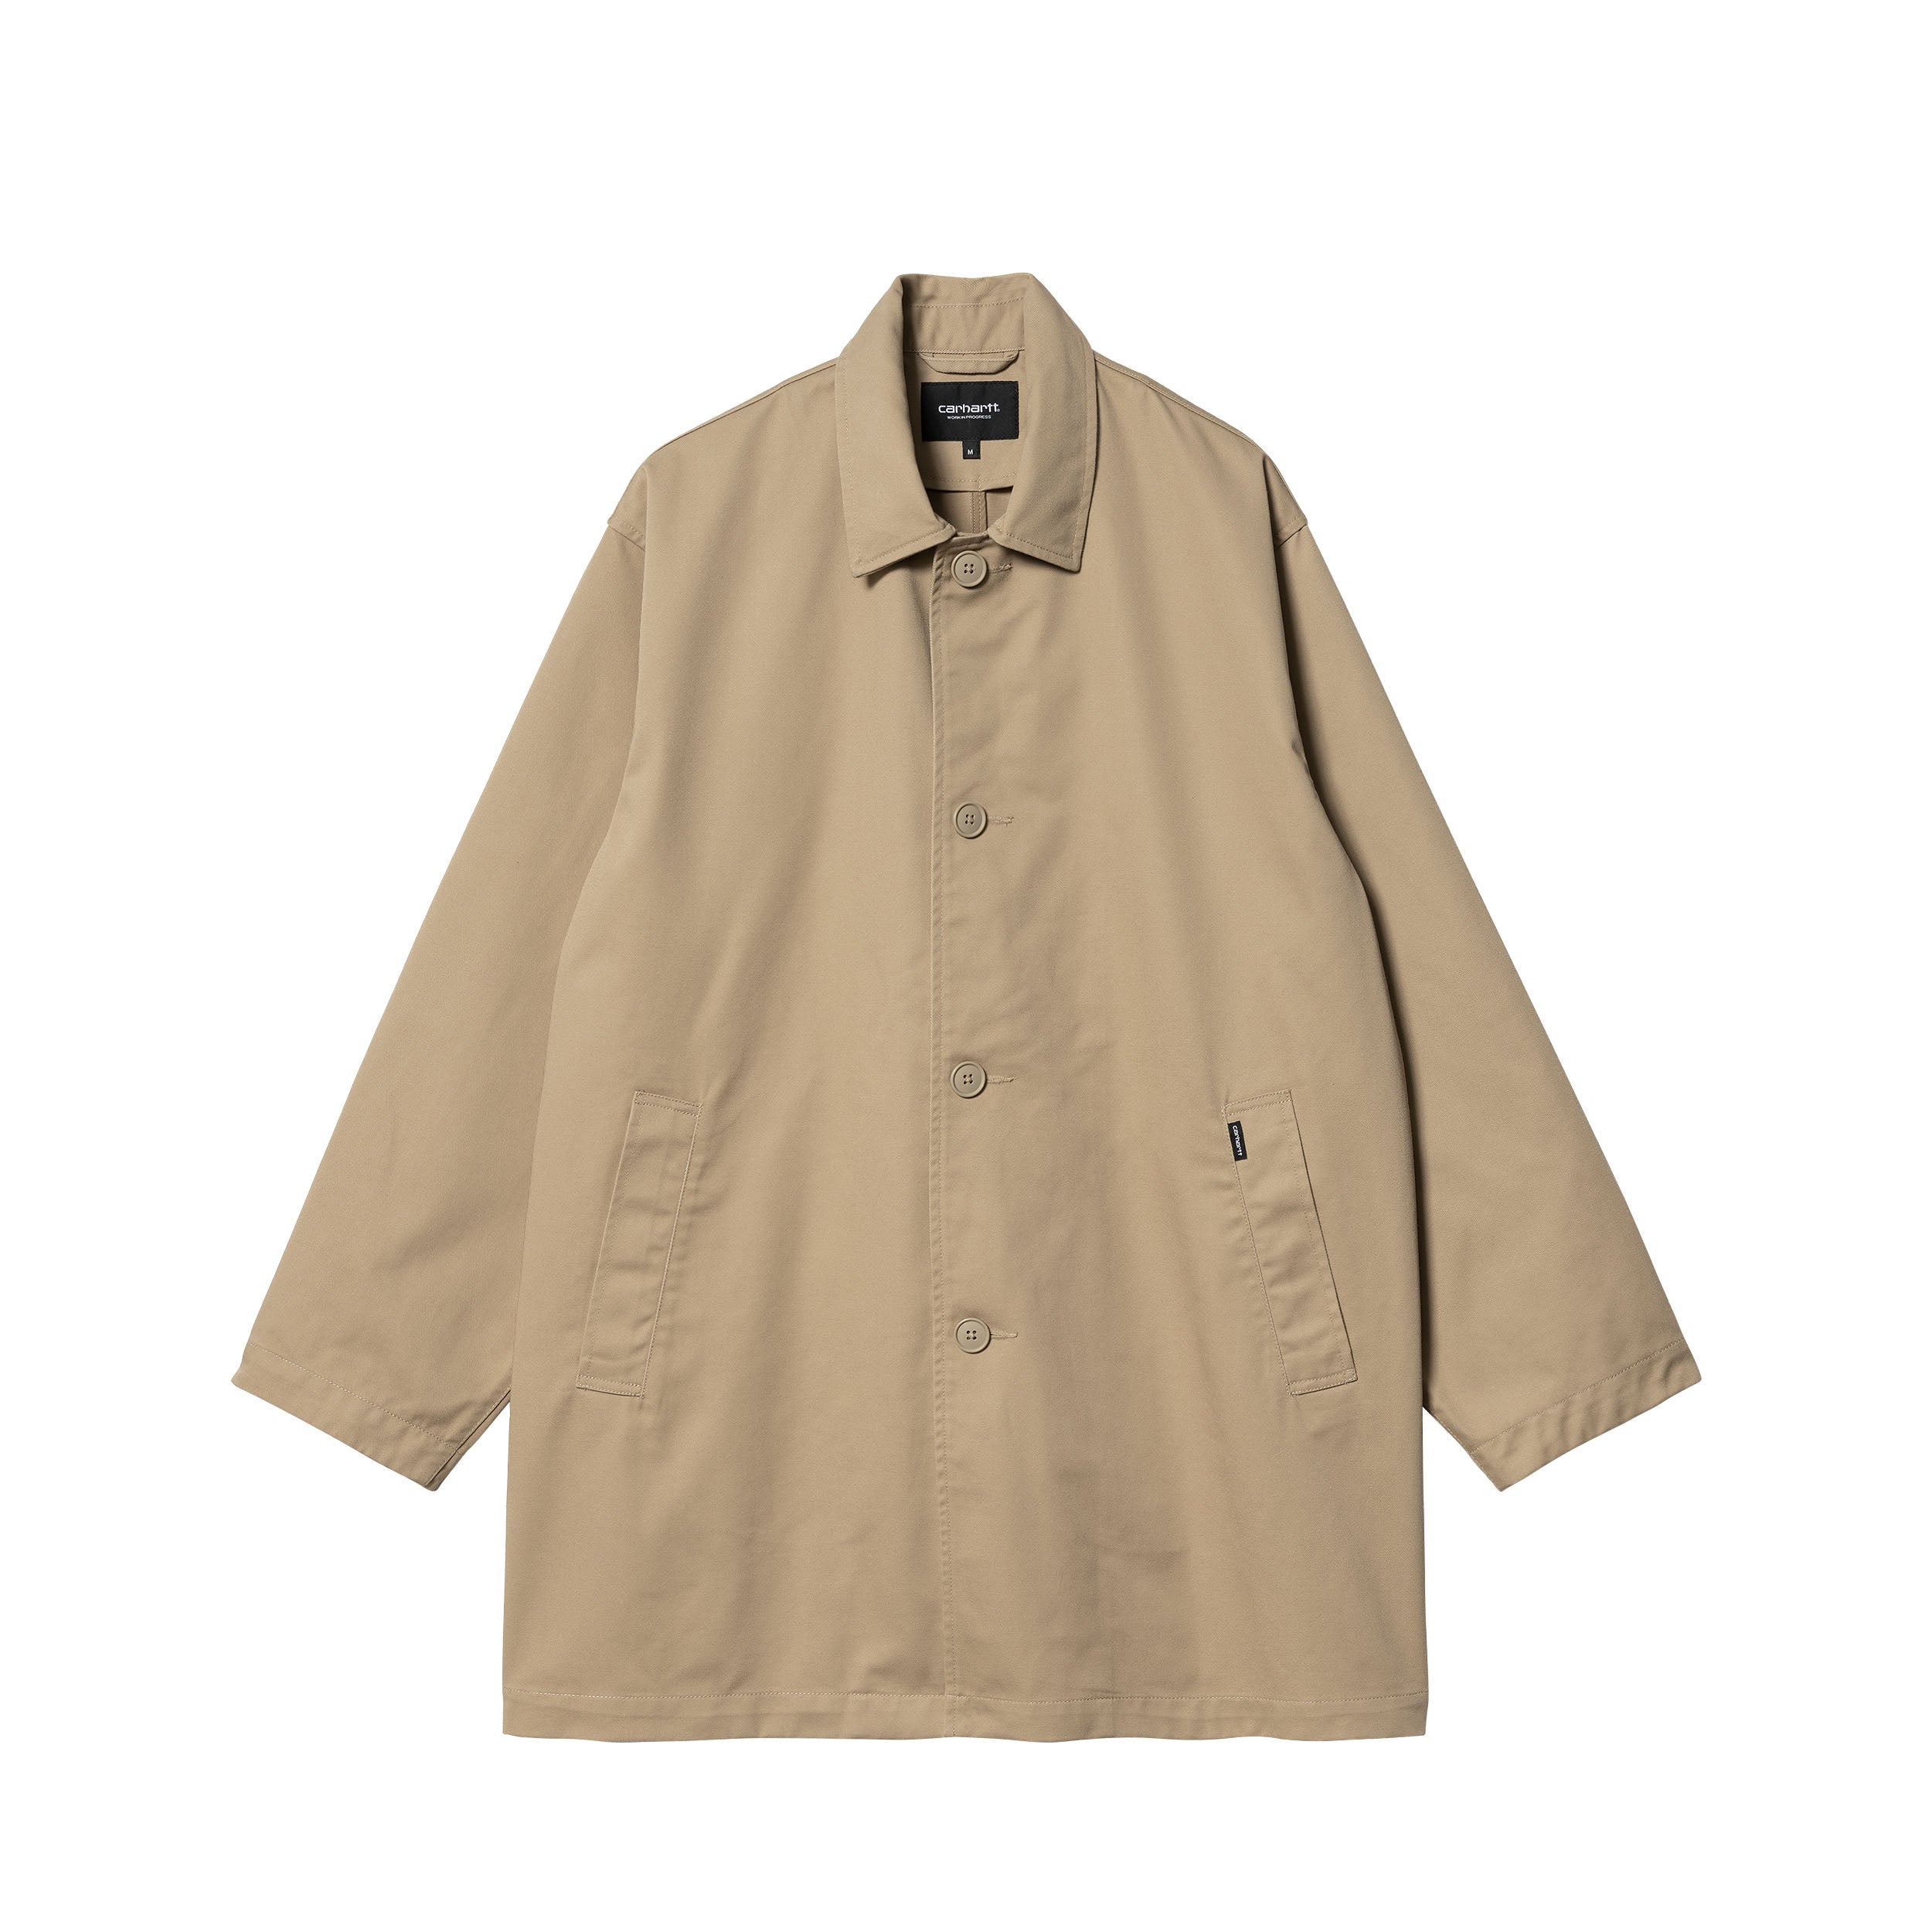 Carhartt WIP Newhaven Coat (sable/rinsed) - Blue Mountain Store